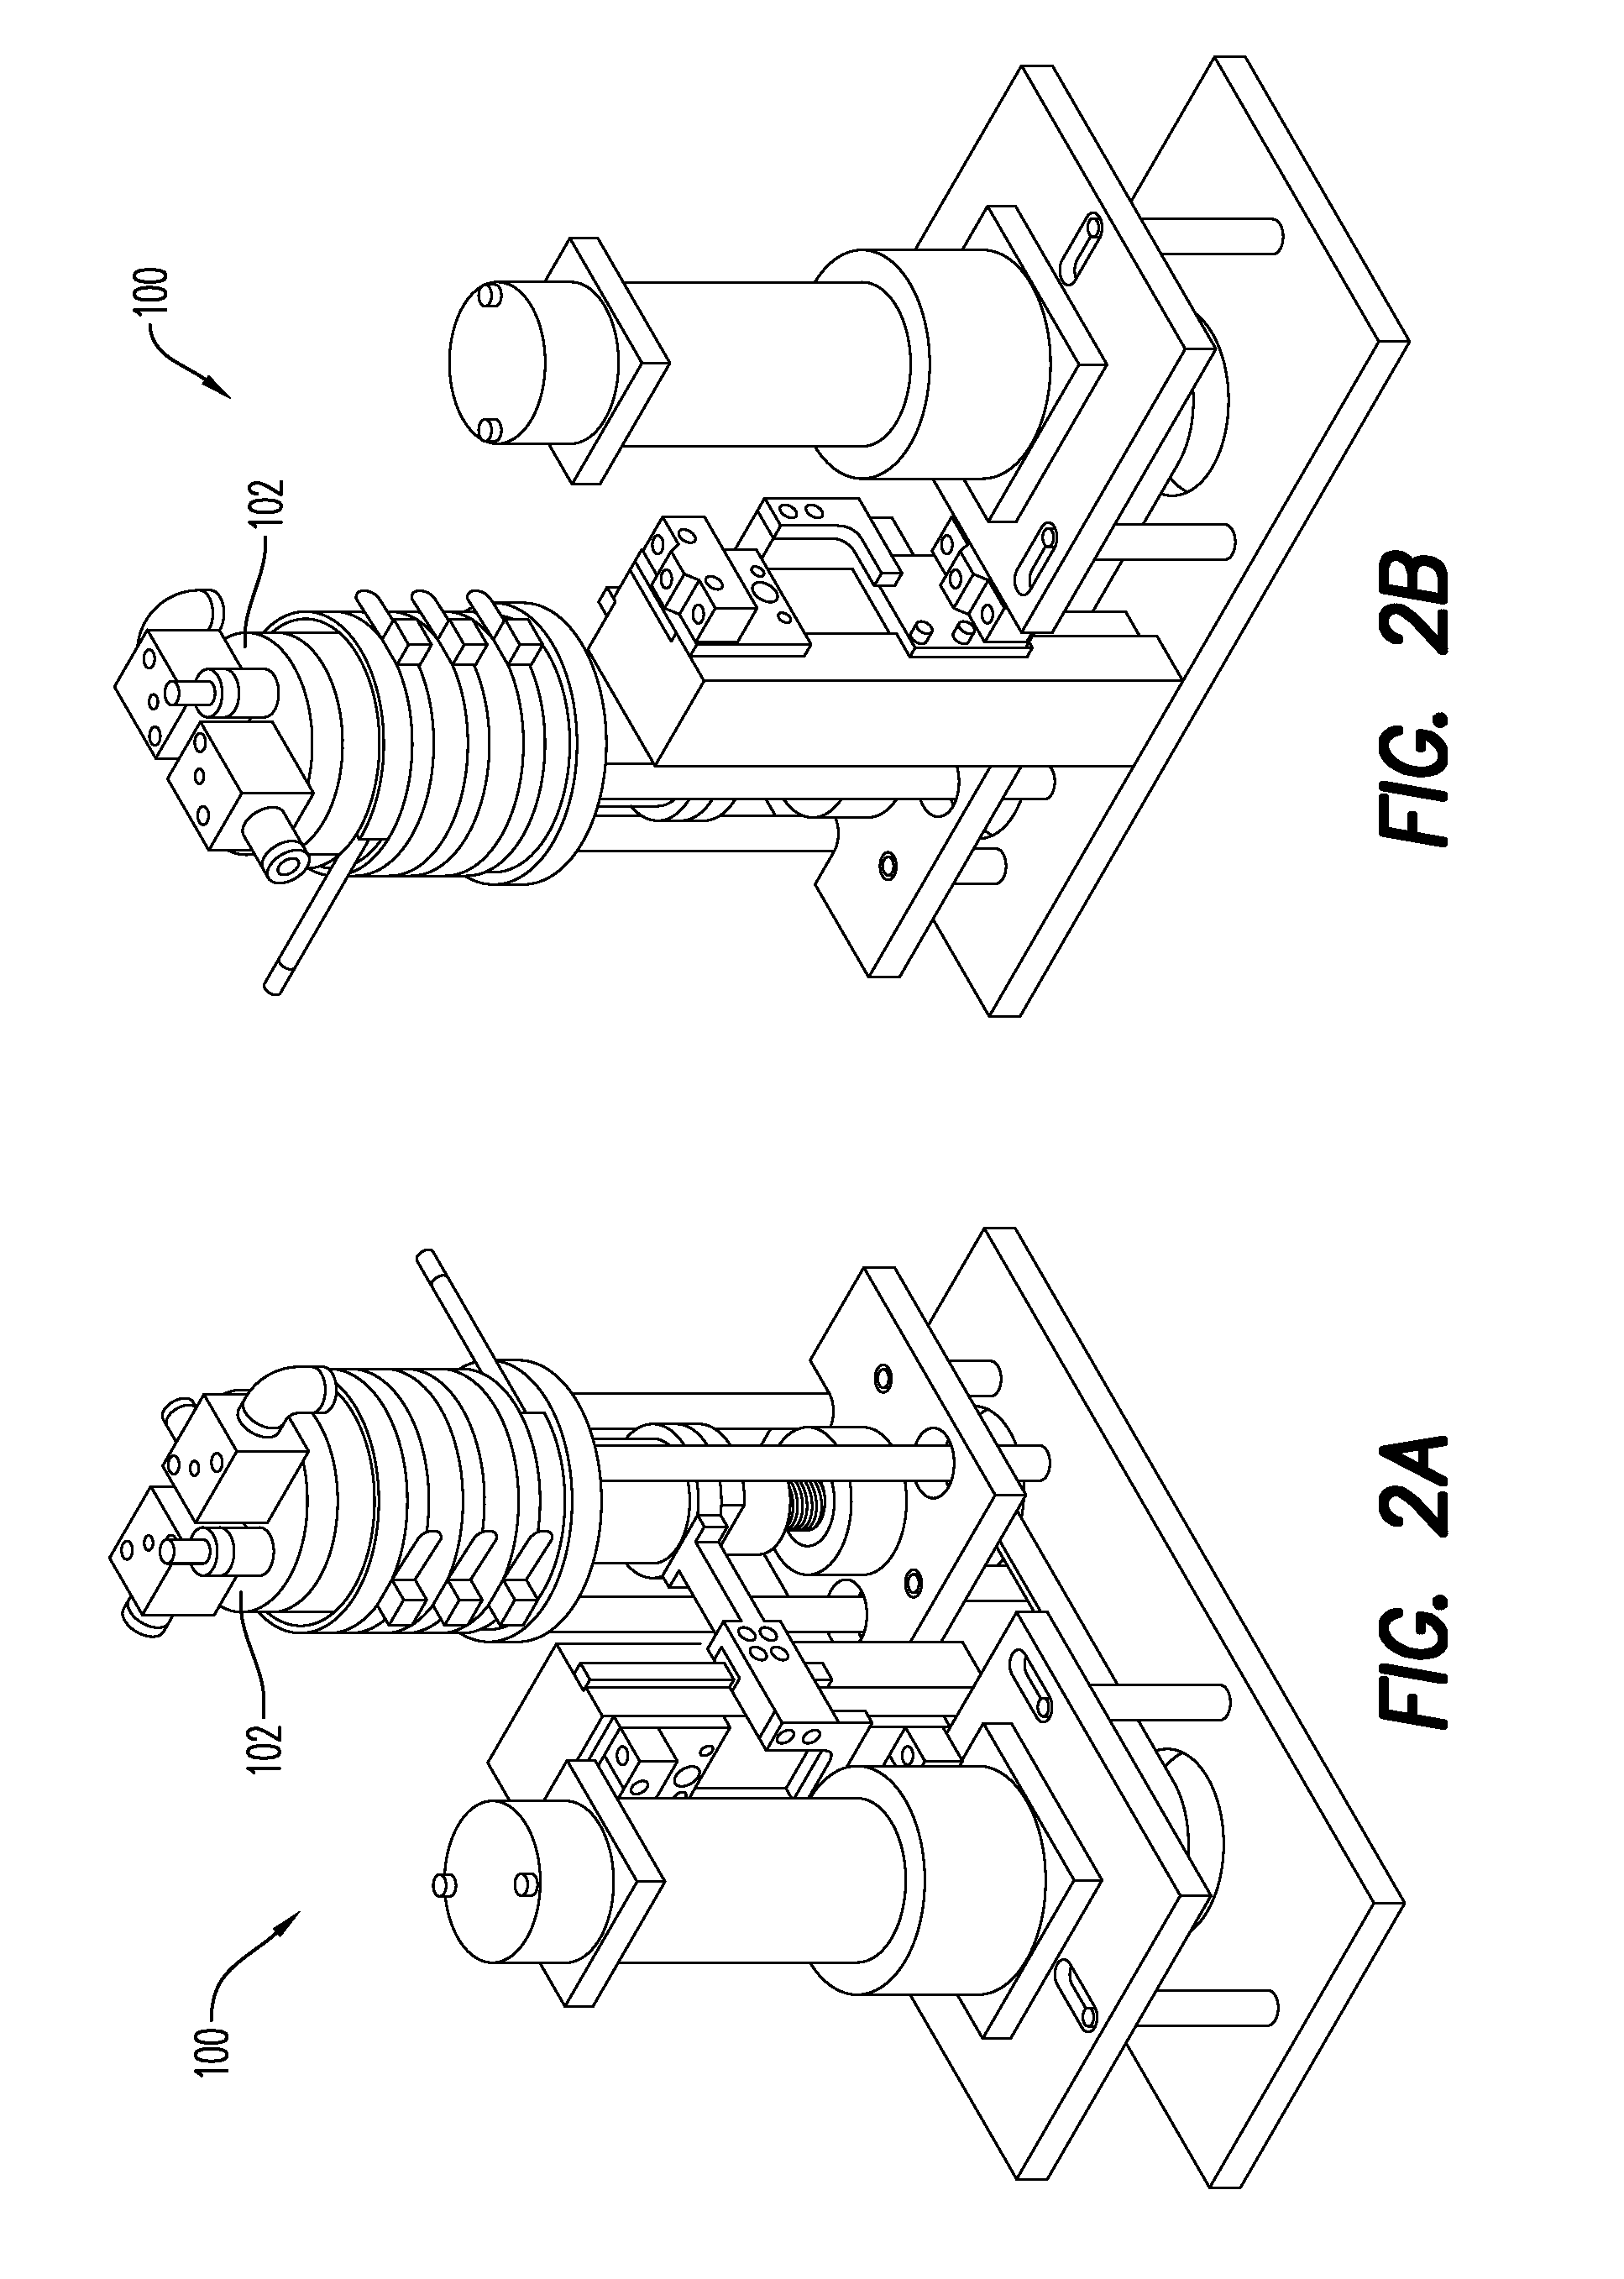 Cartridges for storing food materials and methods and apparatus for processing food materials stored within such cartridges